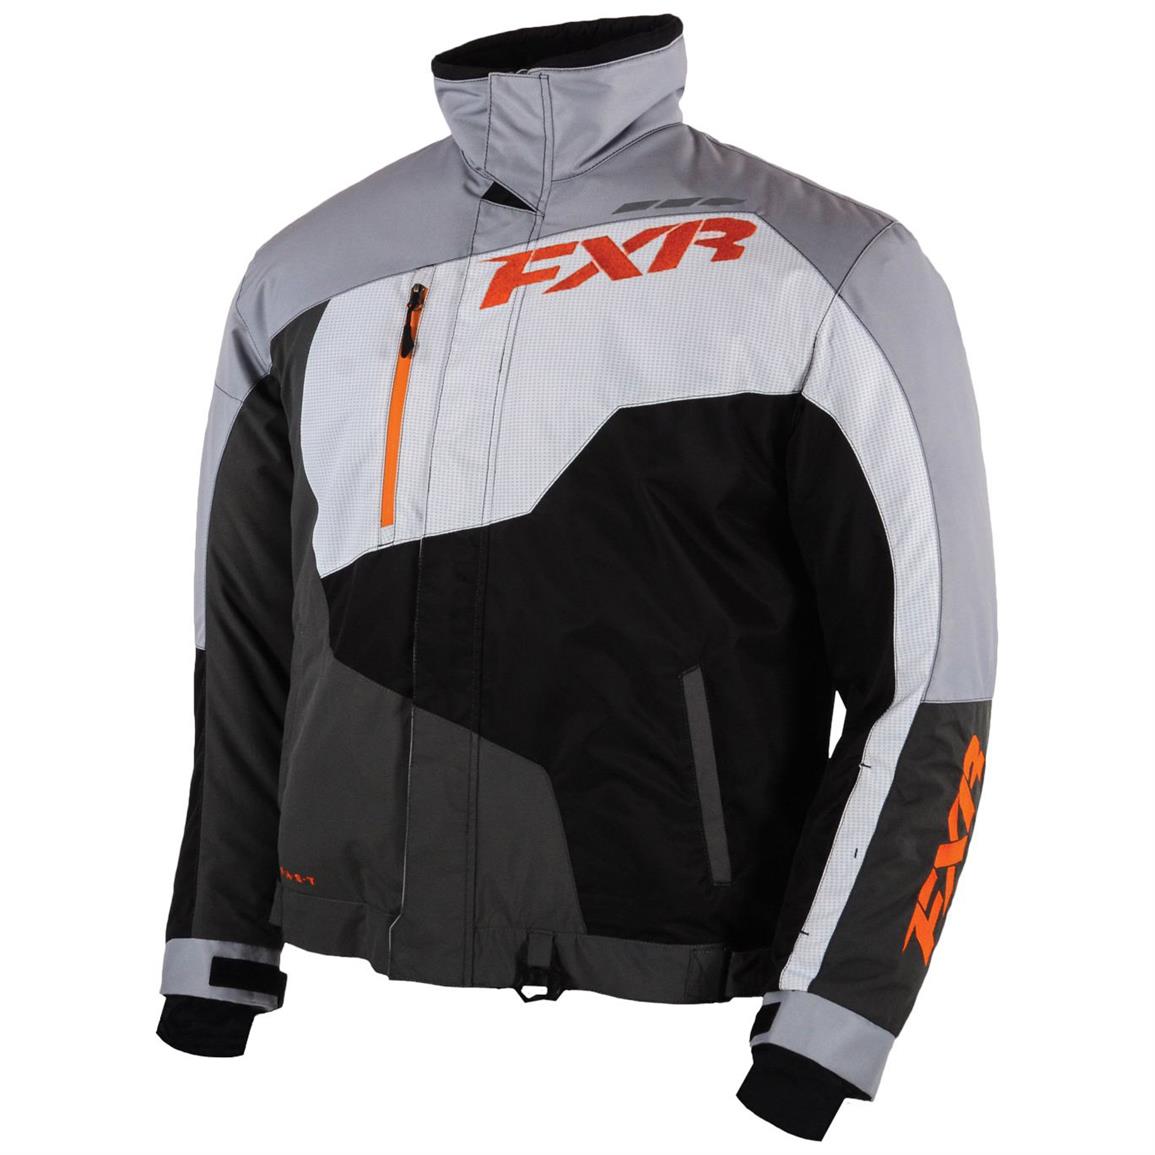 FXR Turbo Jacket - 627799, Snowmobile Clothing at Sportsman's Guide